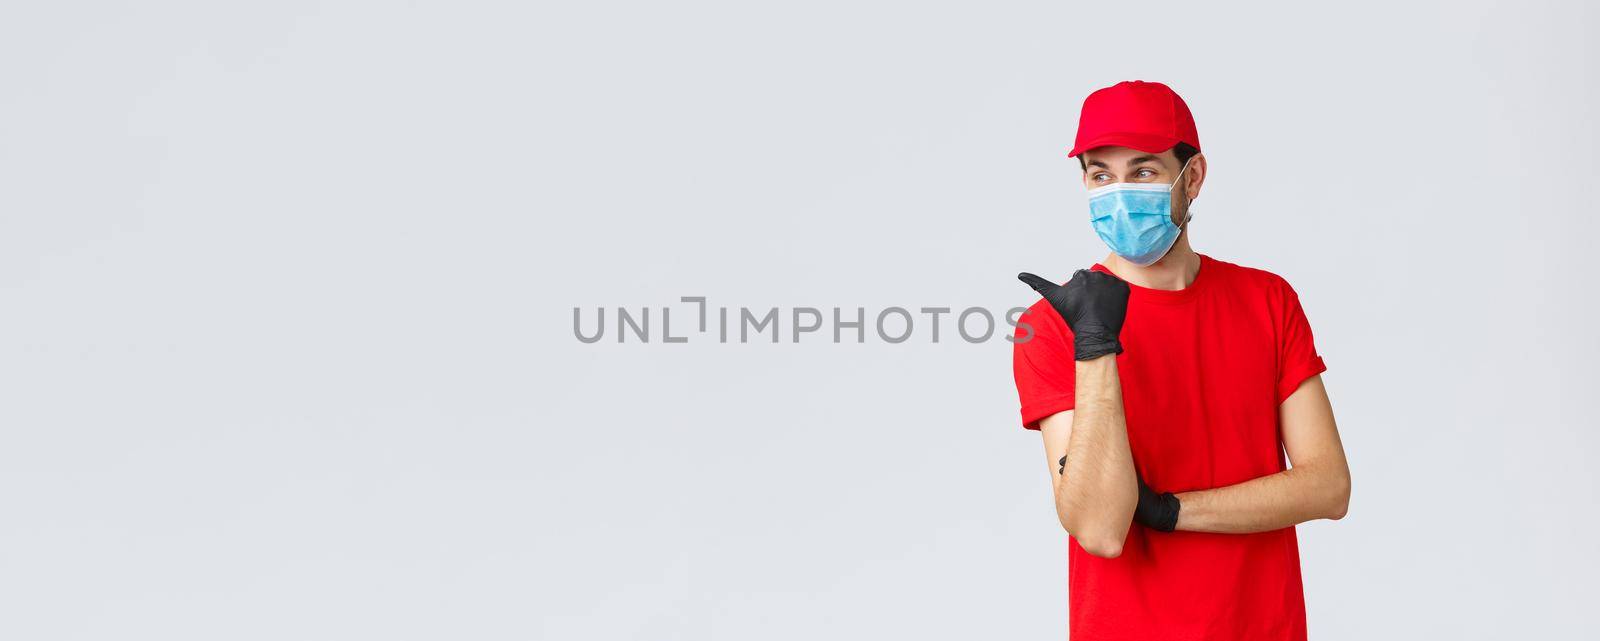 Covid-19, self-quarantine, online shopping and shipping concept. Delivery guy in red uniform, gloves and face mask, pointing left and smiling, recommend client use courier service.